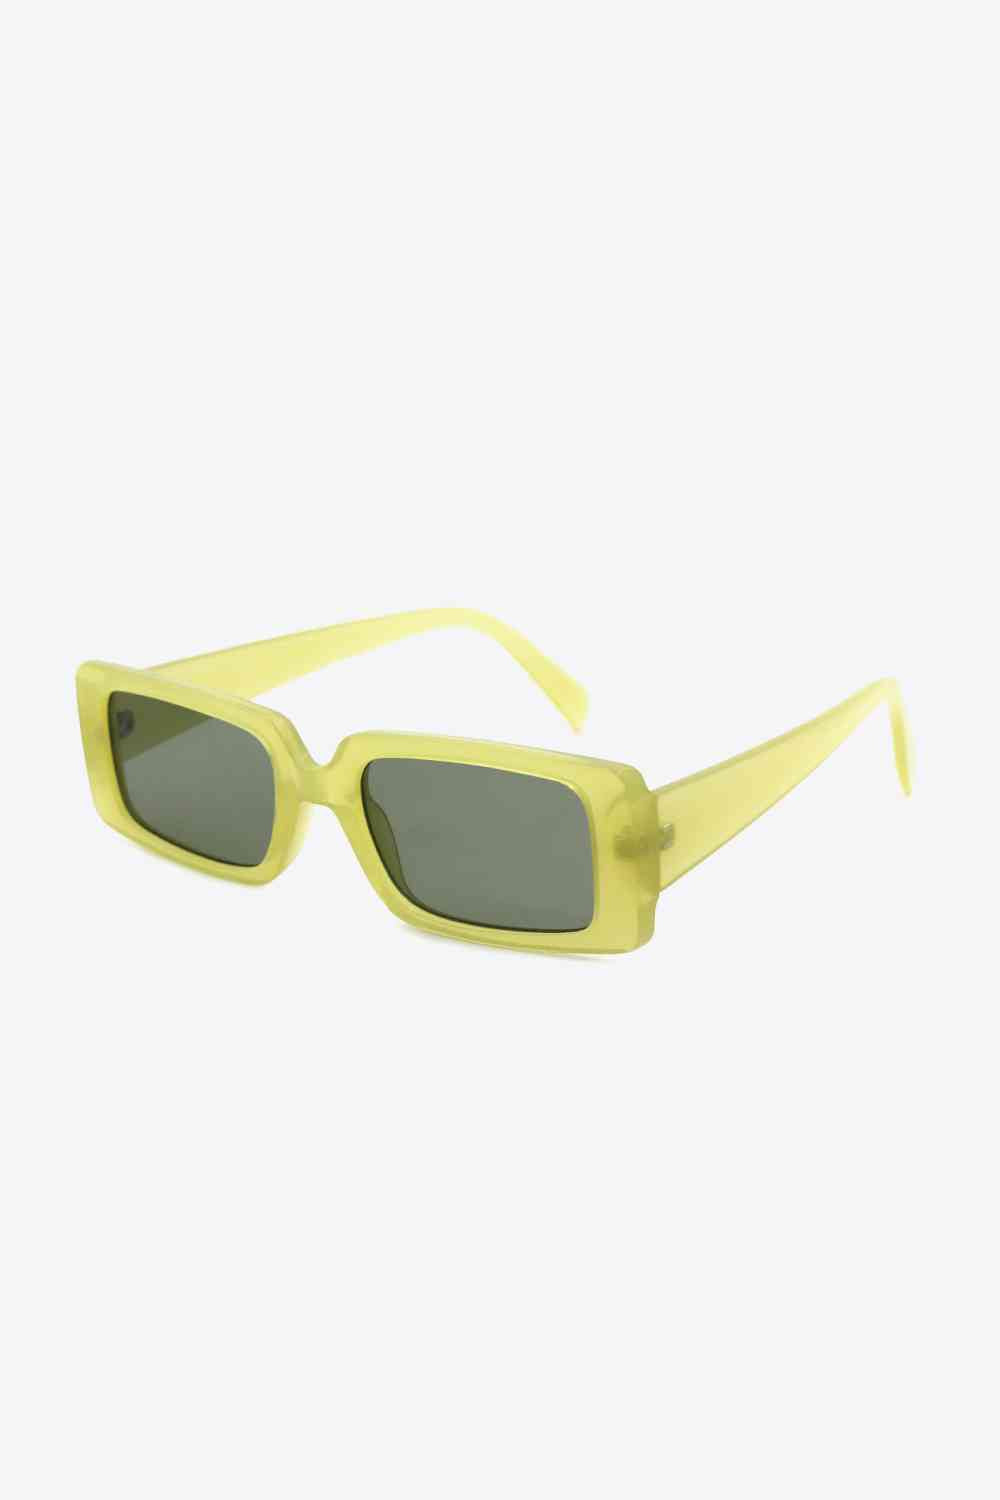 UV400 Polycarbonate Rectangle Sunglasses Yellow Green One Size